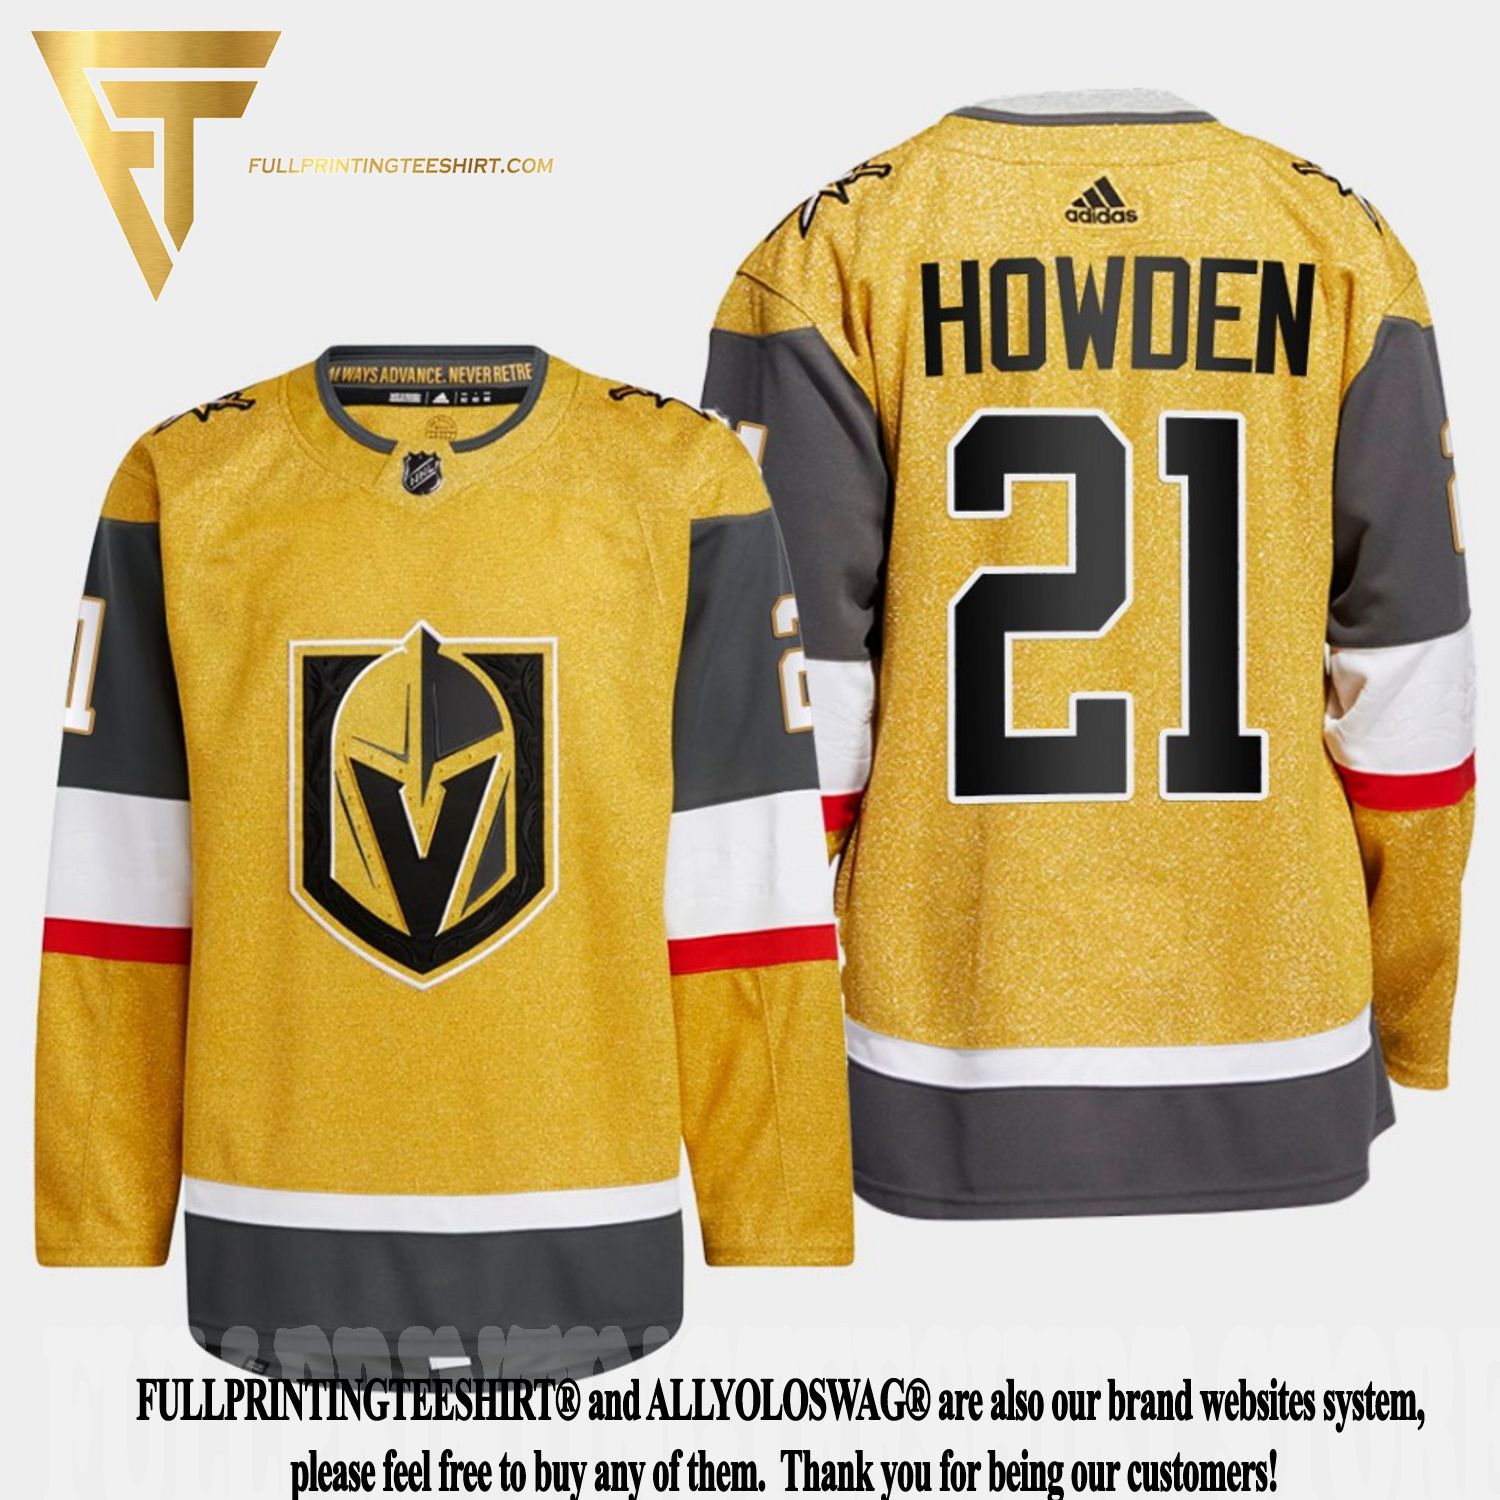 Top Selling NHL Player Jerseys on